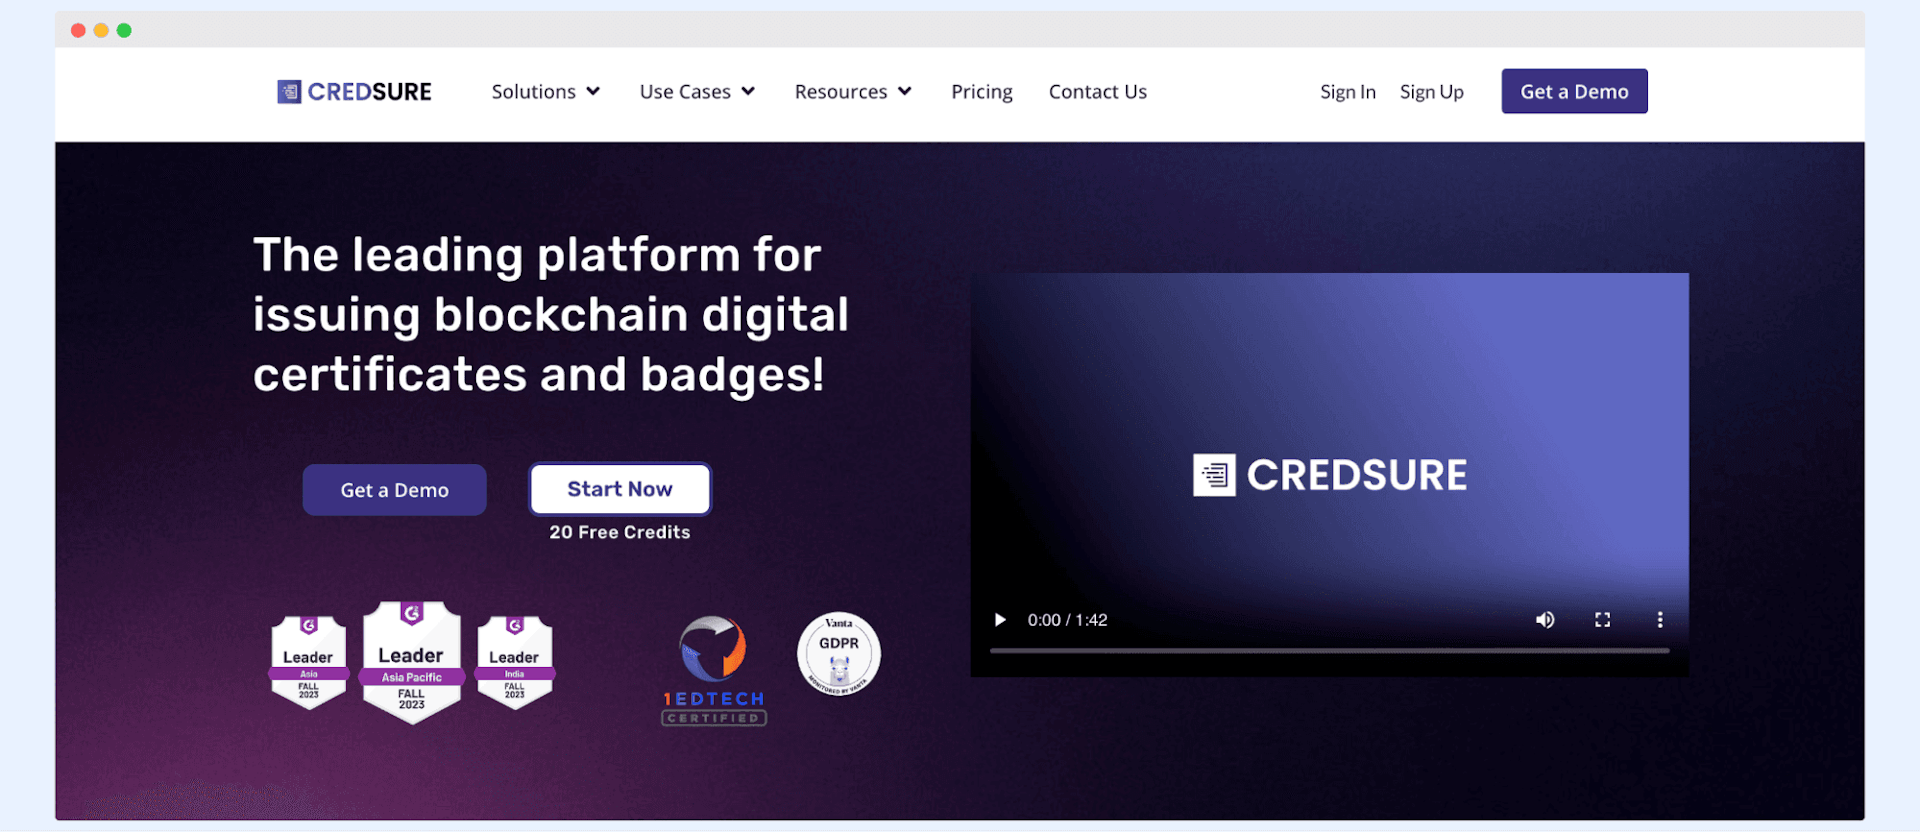 CredSure page as an alternative to CertifyMe.